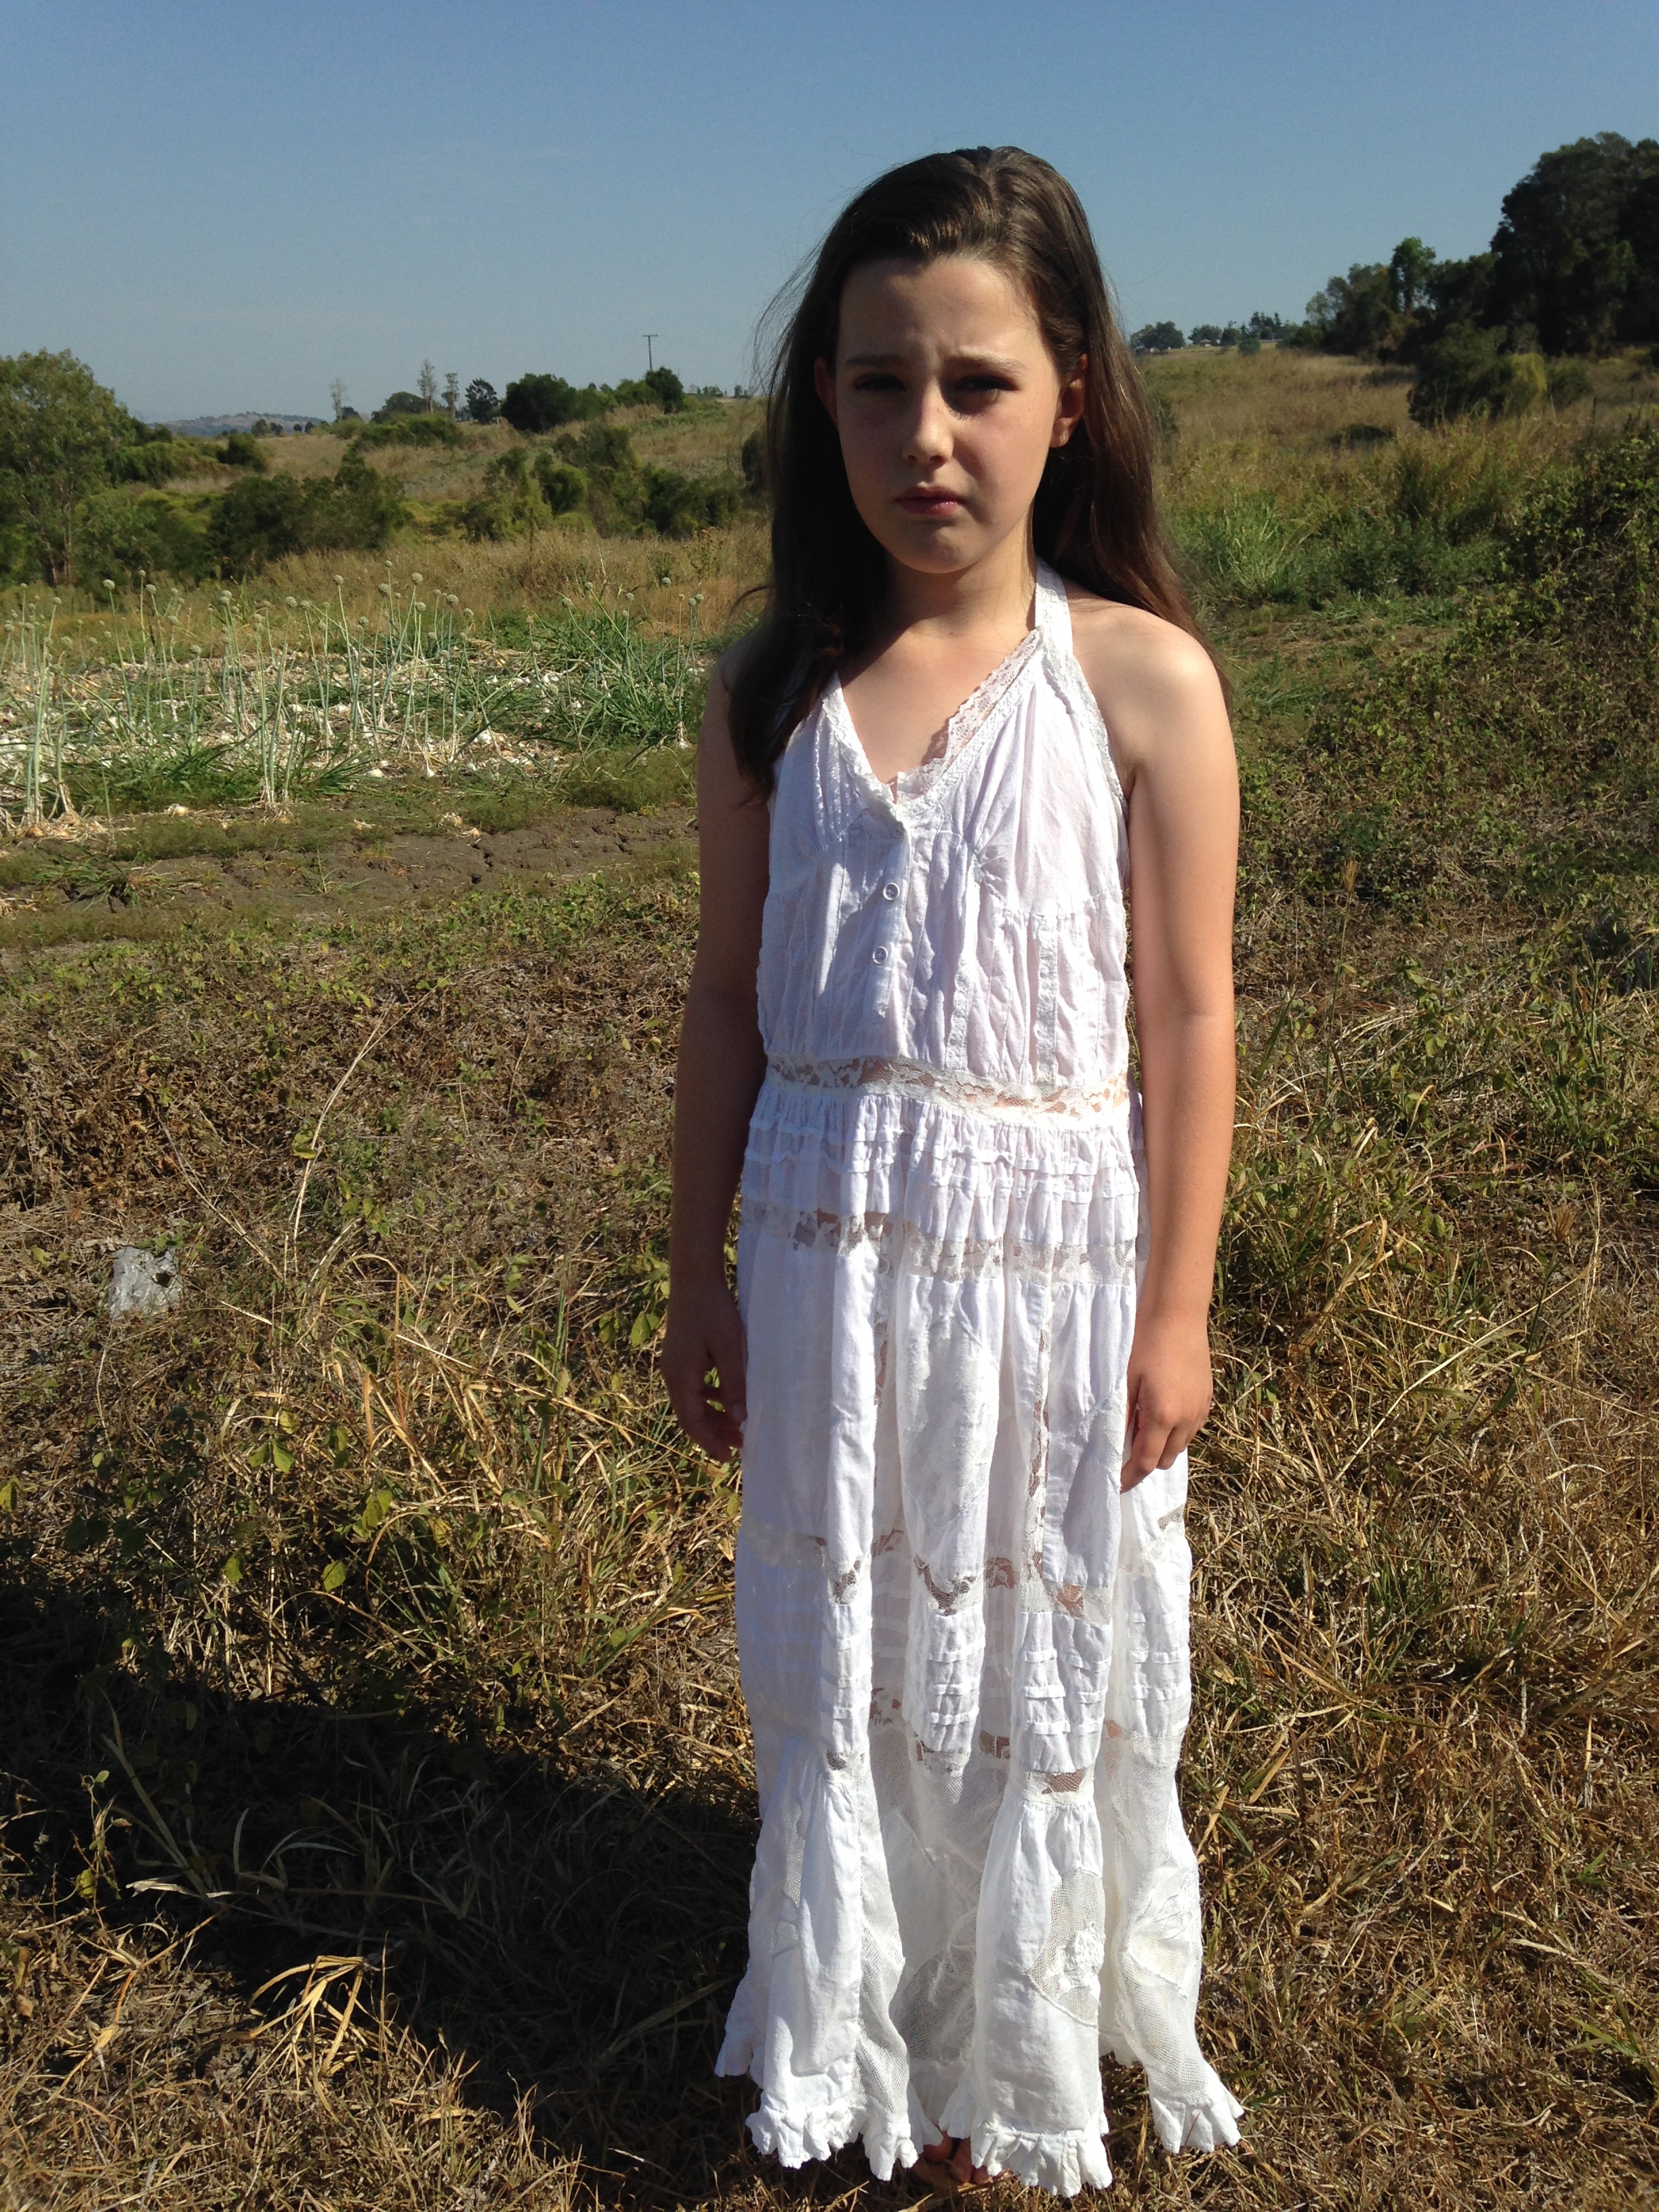 Sophie as young Charlie on the set of CHARLIE (trailer) 2013